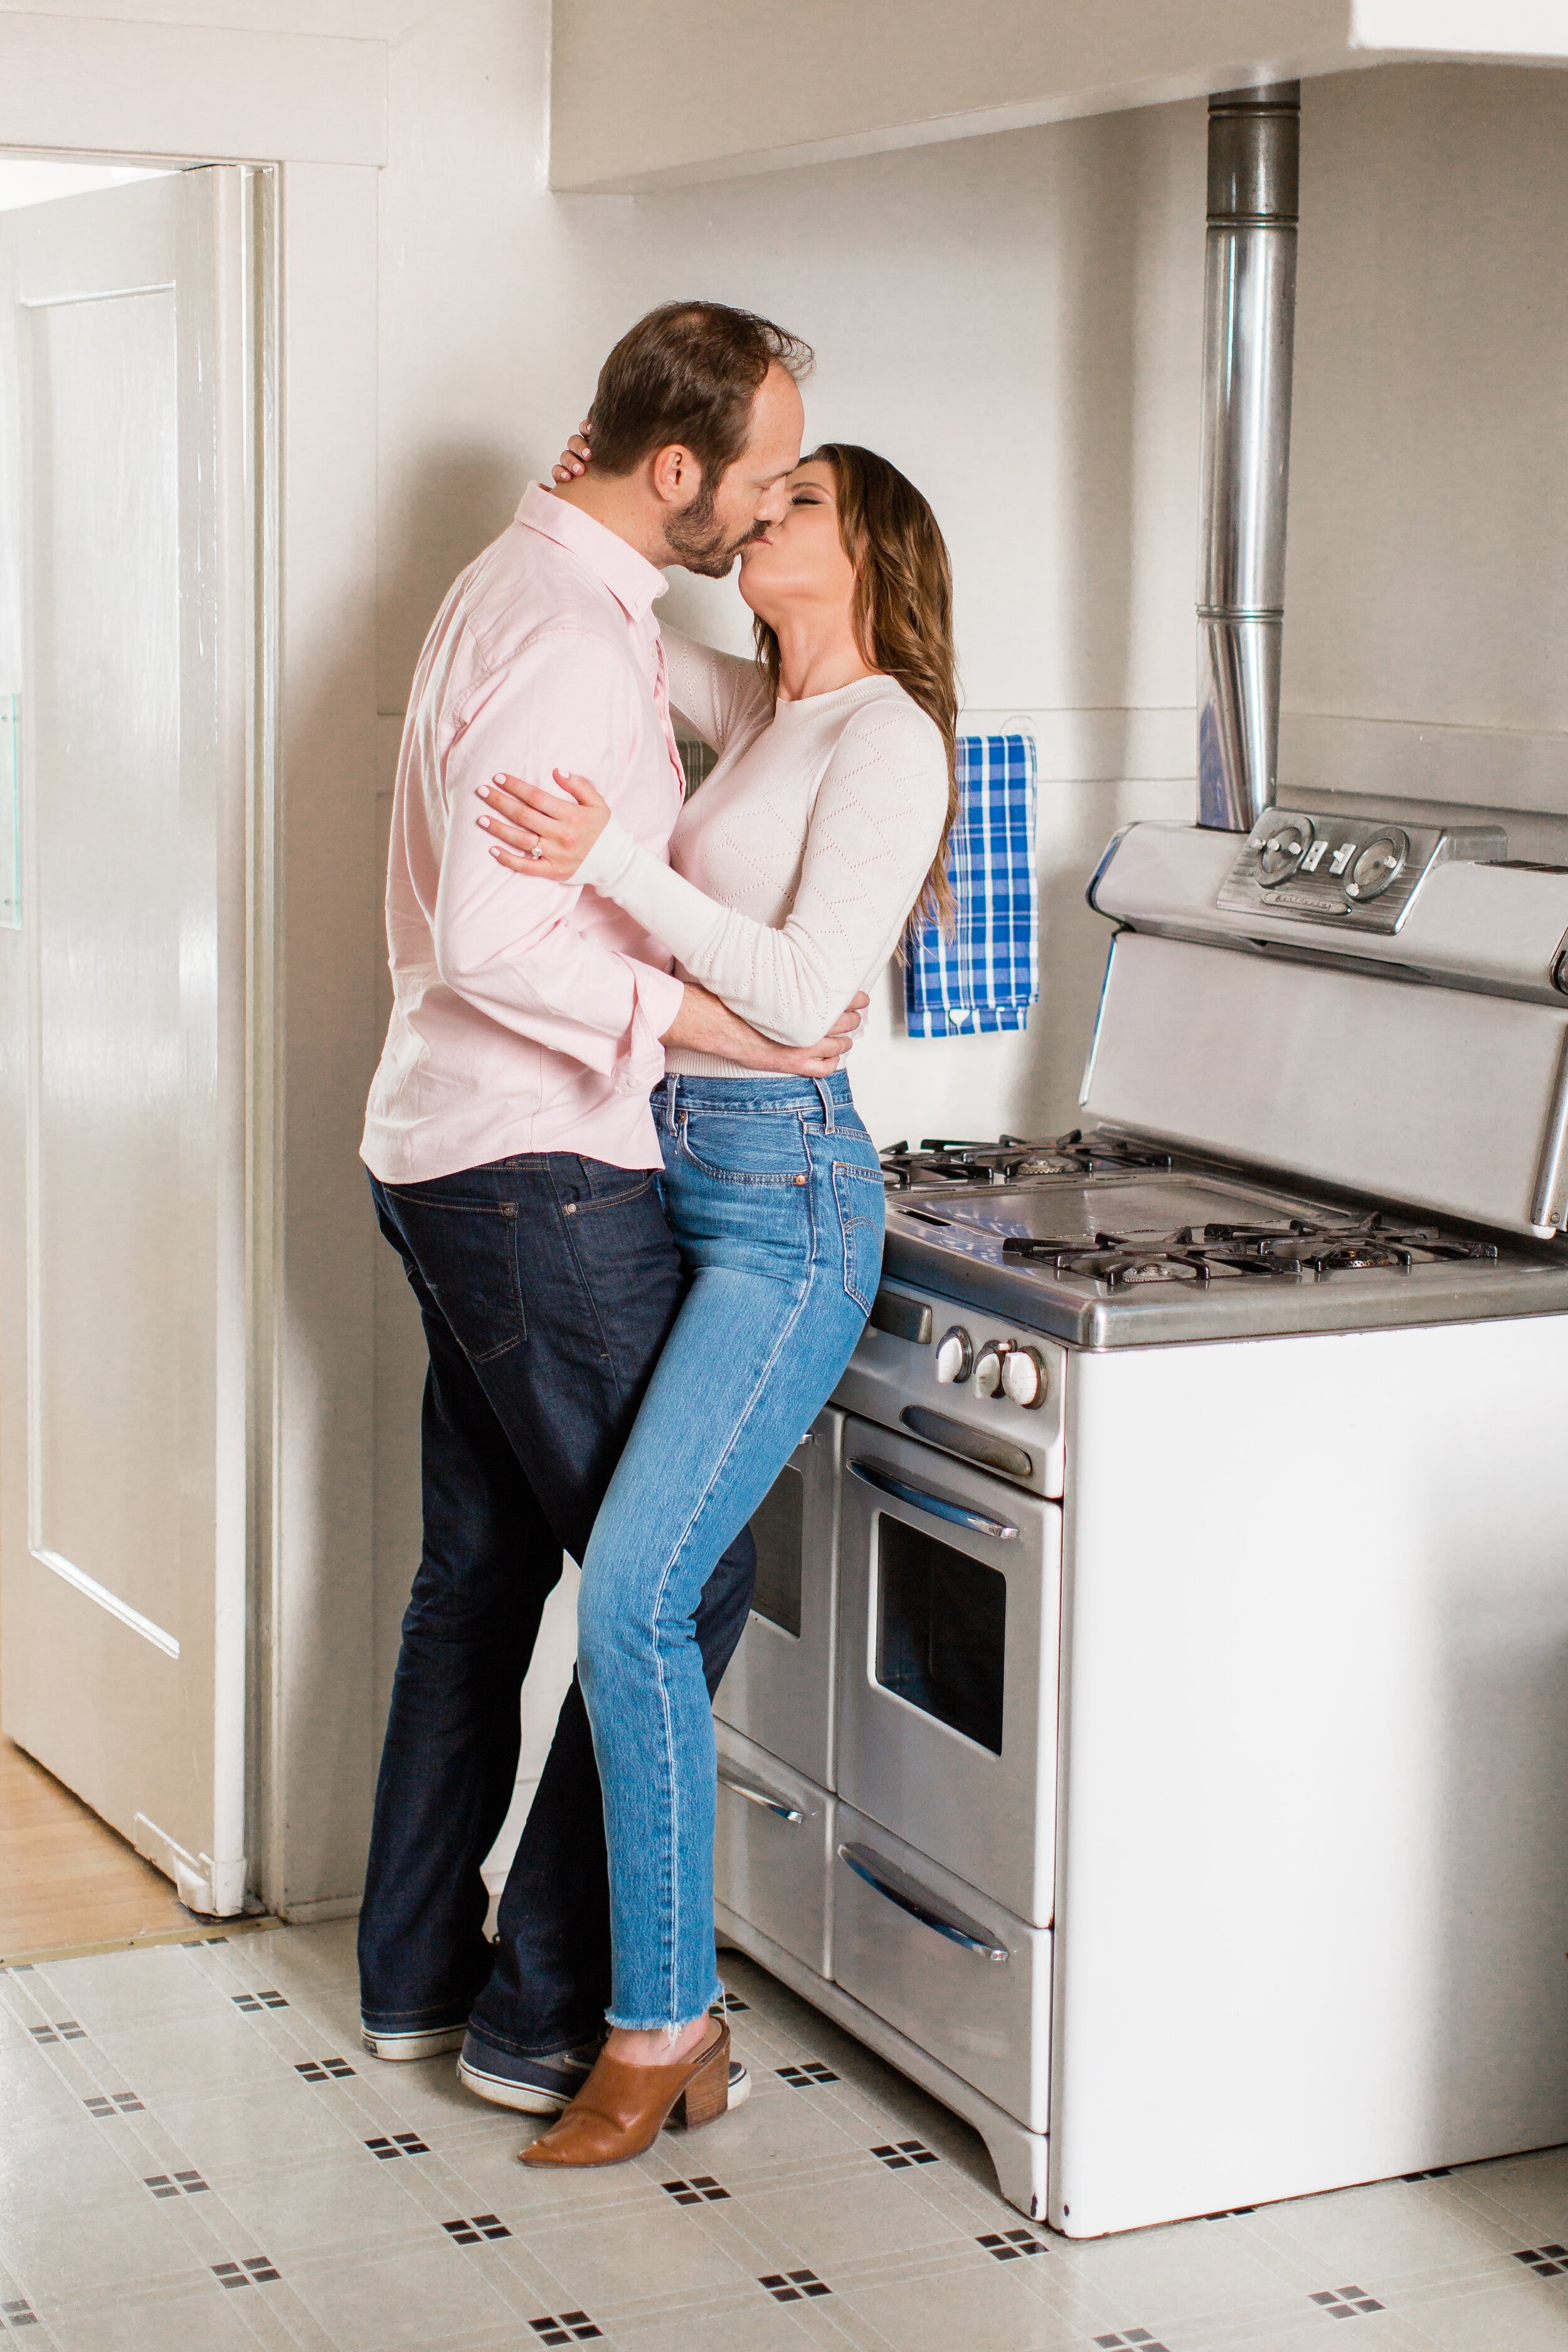 Couples kisses in their kitchen for Engagement Session